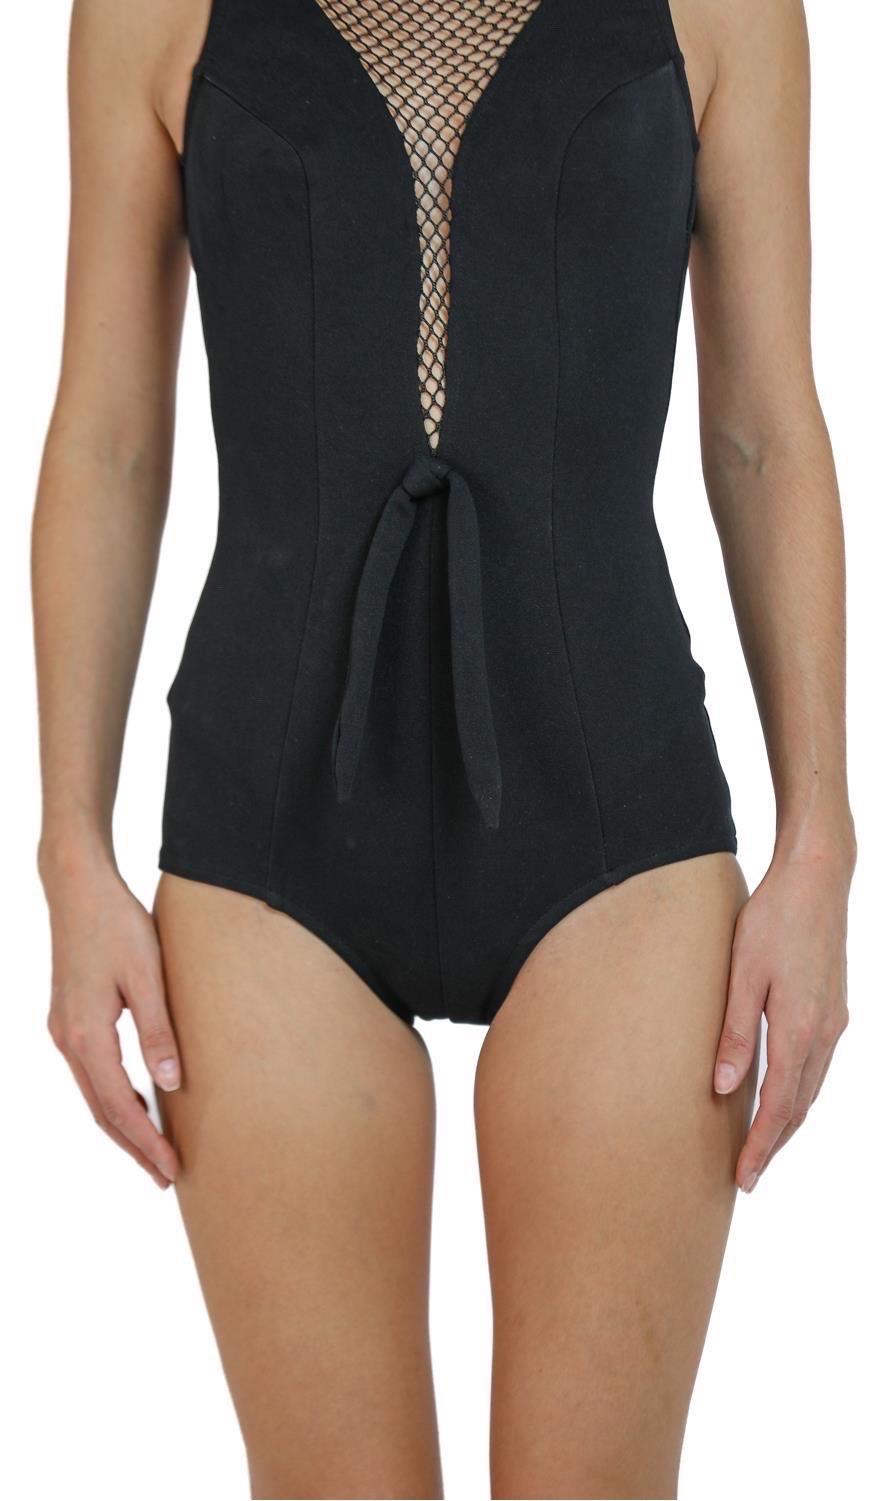 1960S Black Polyester Stretch Bond Girl Swimsuit With Fish Net At Neck For Sale 6